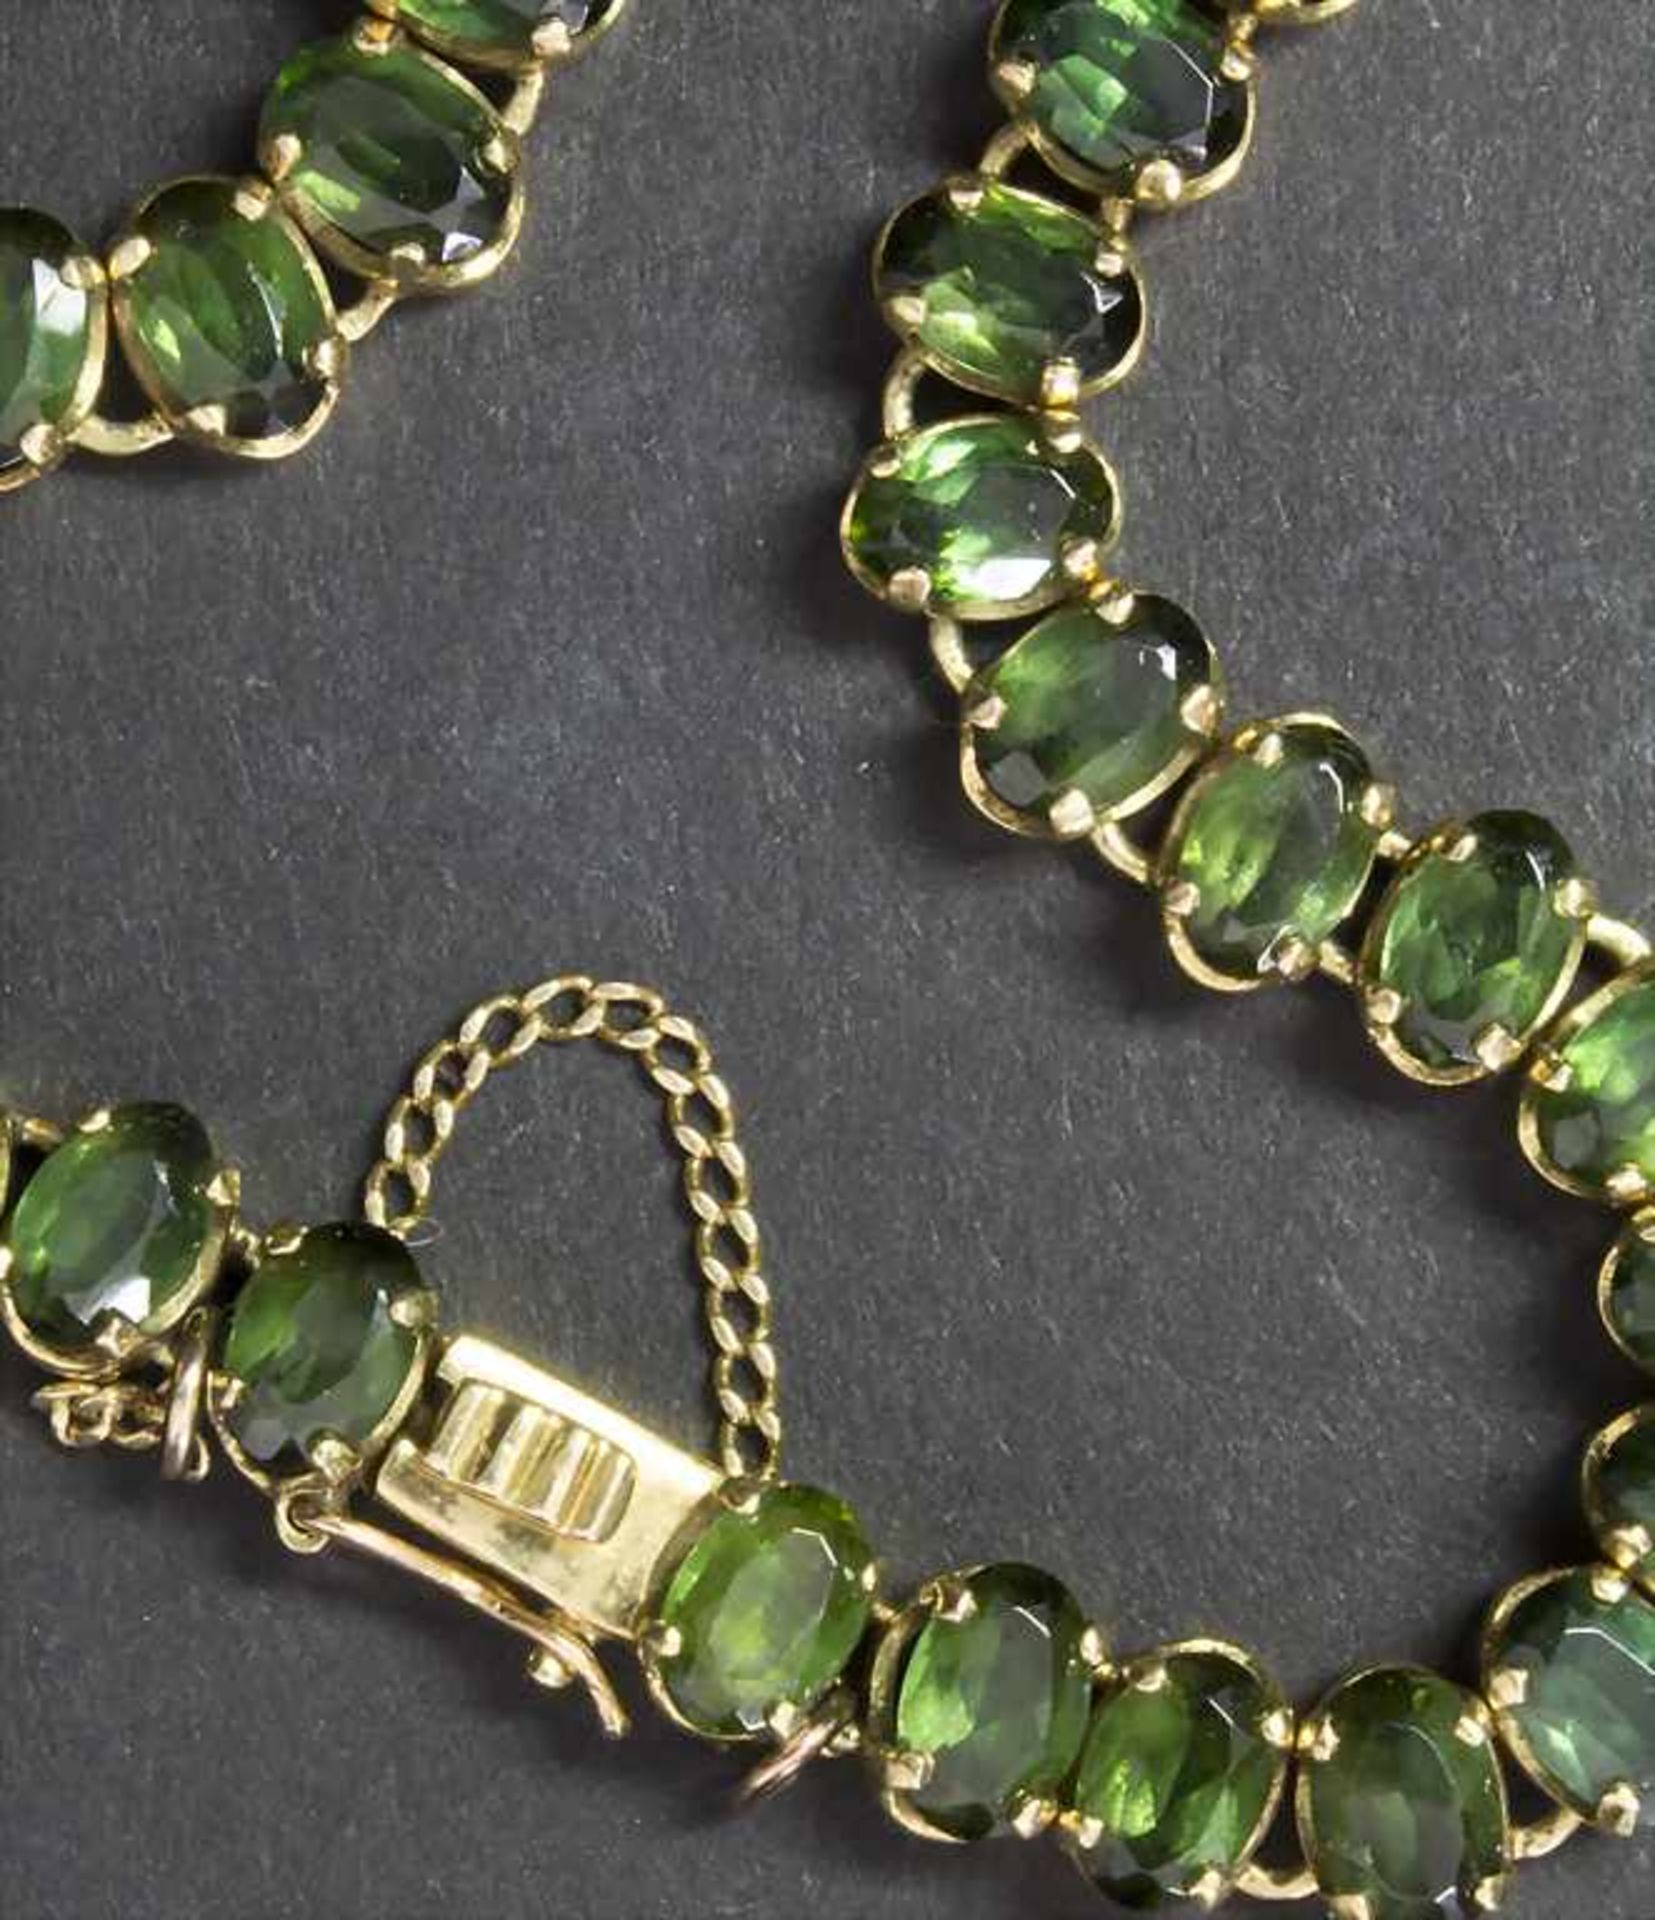 Armband mit grünen Farbsteinen / A bracelet with green colored stones< - Image 3 of 3